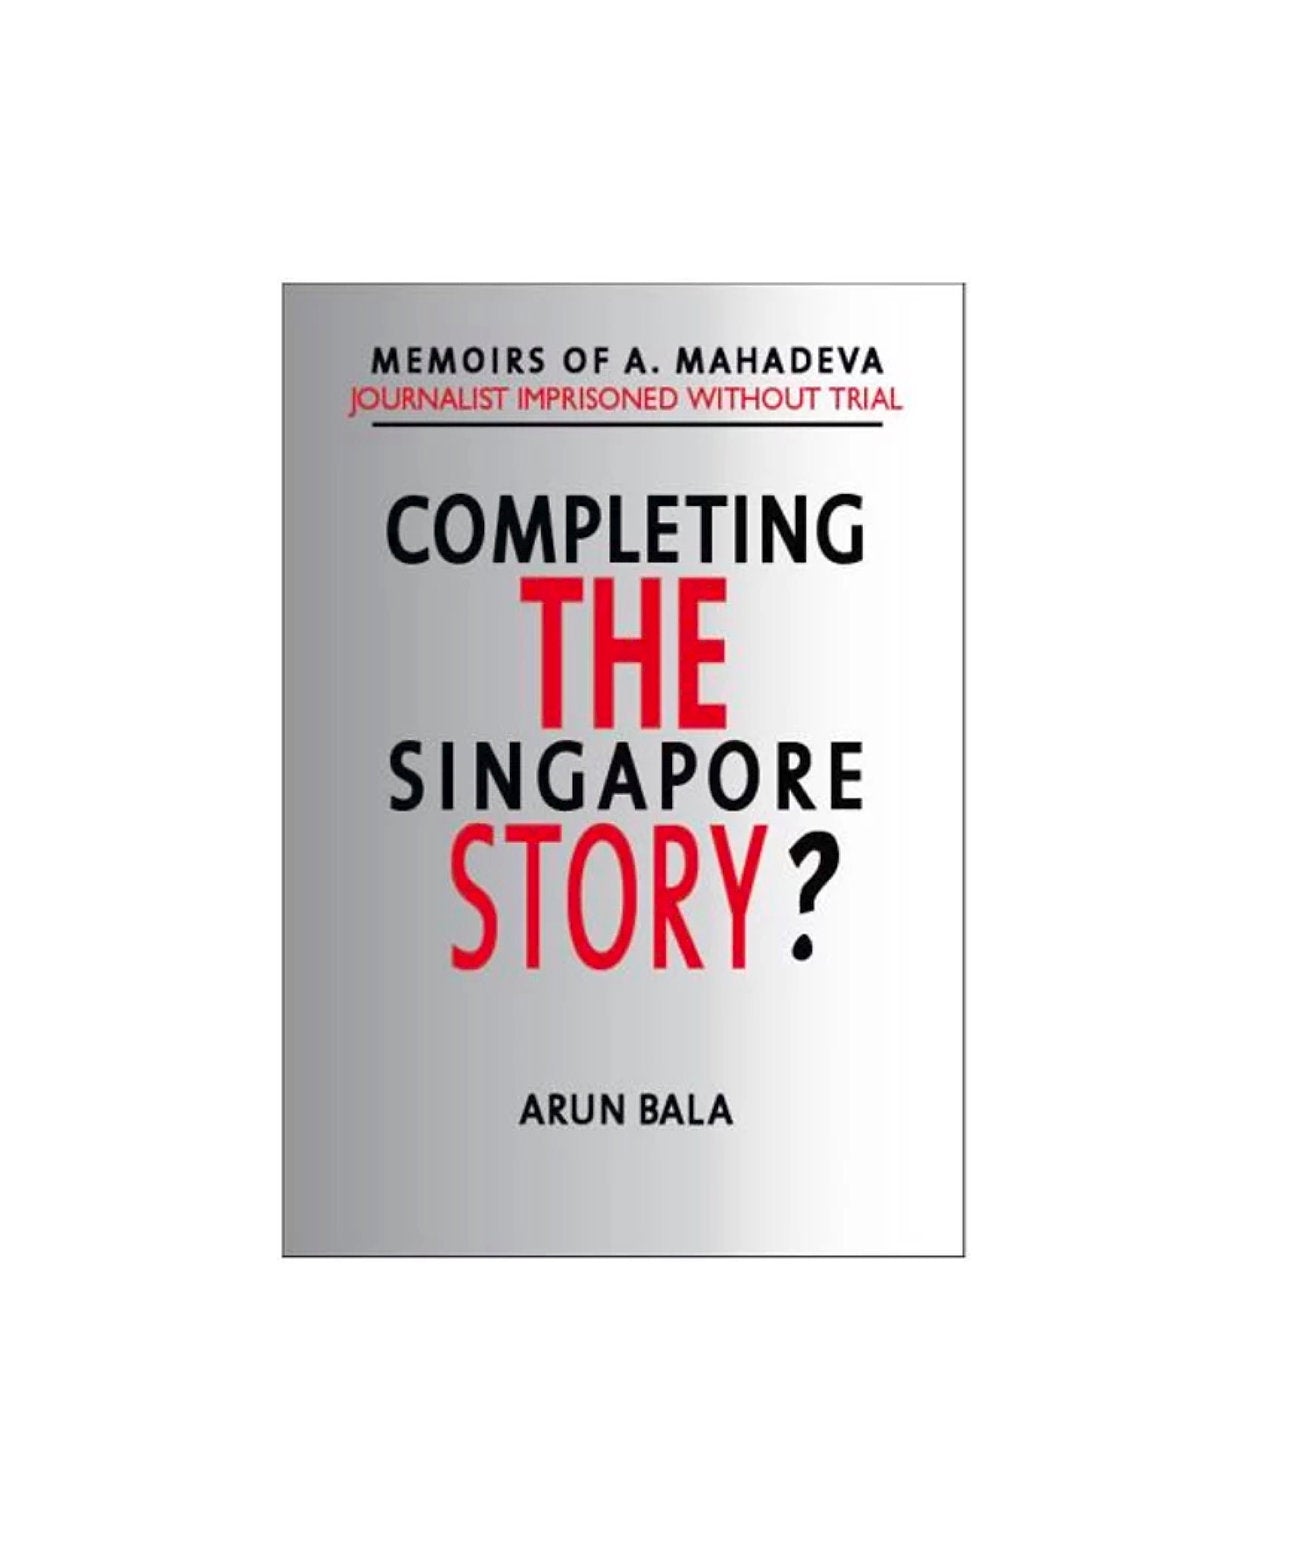 Completing The Singapore Story? / By Arun Bala